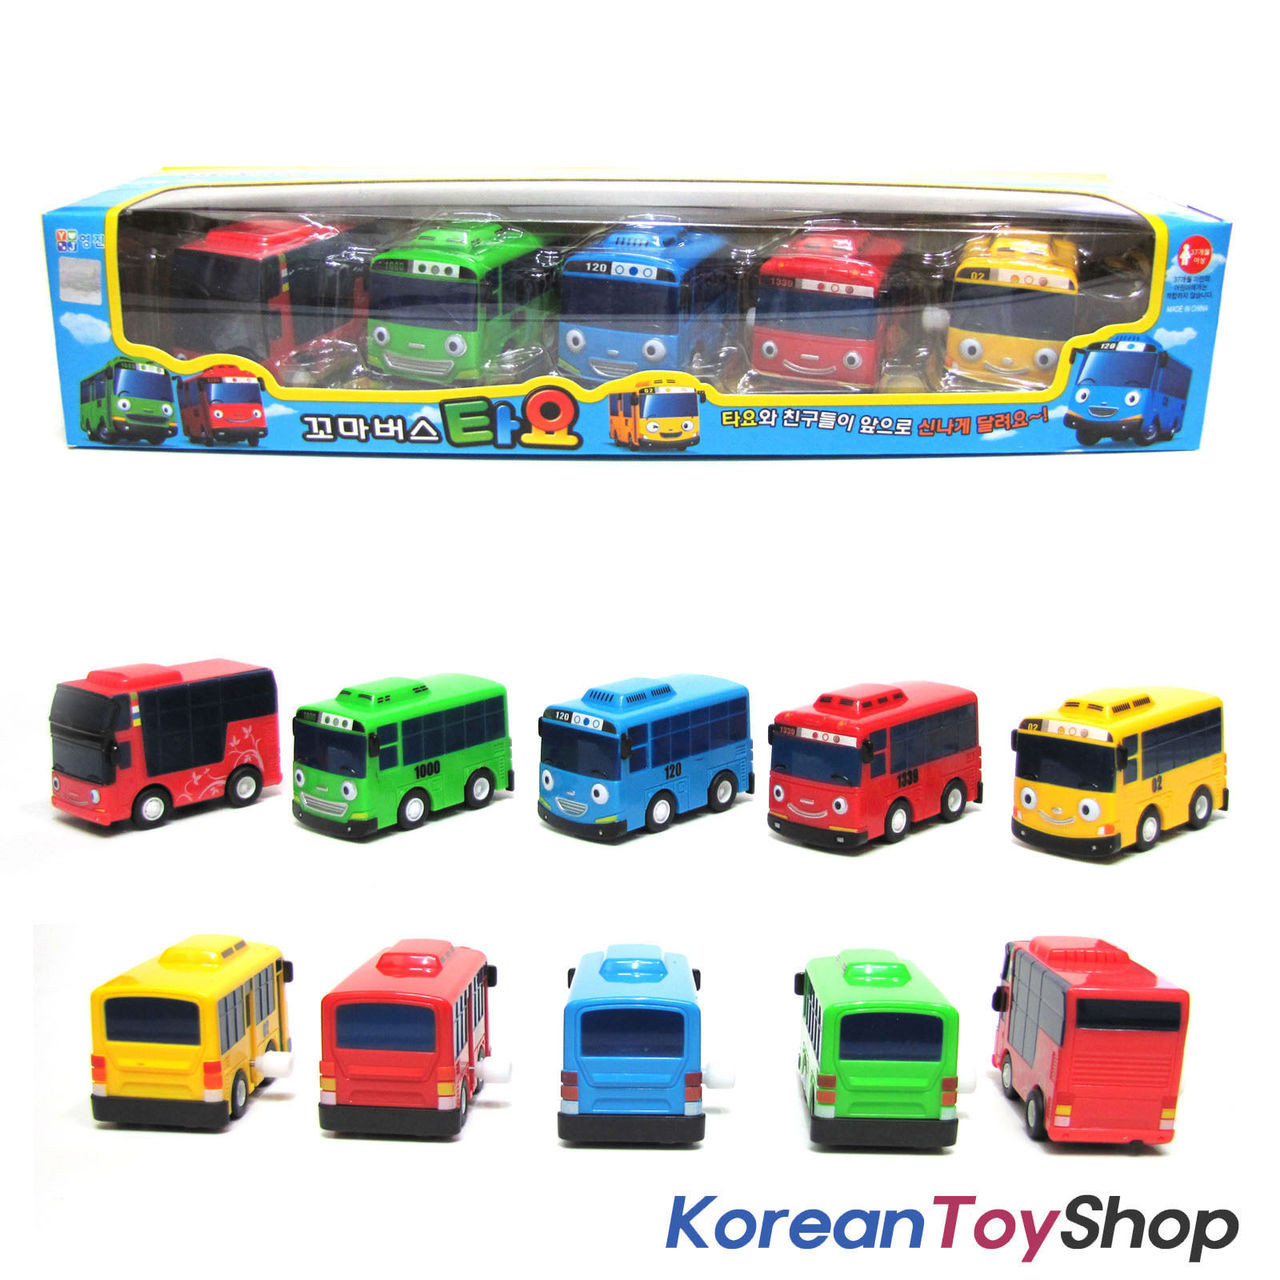 tayo the little bus toy set